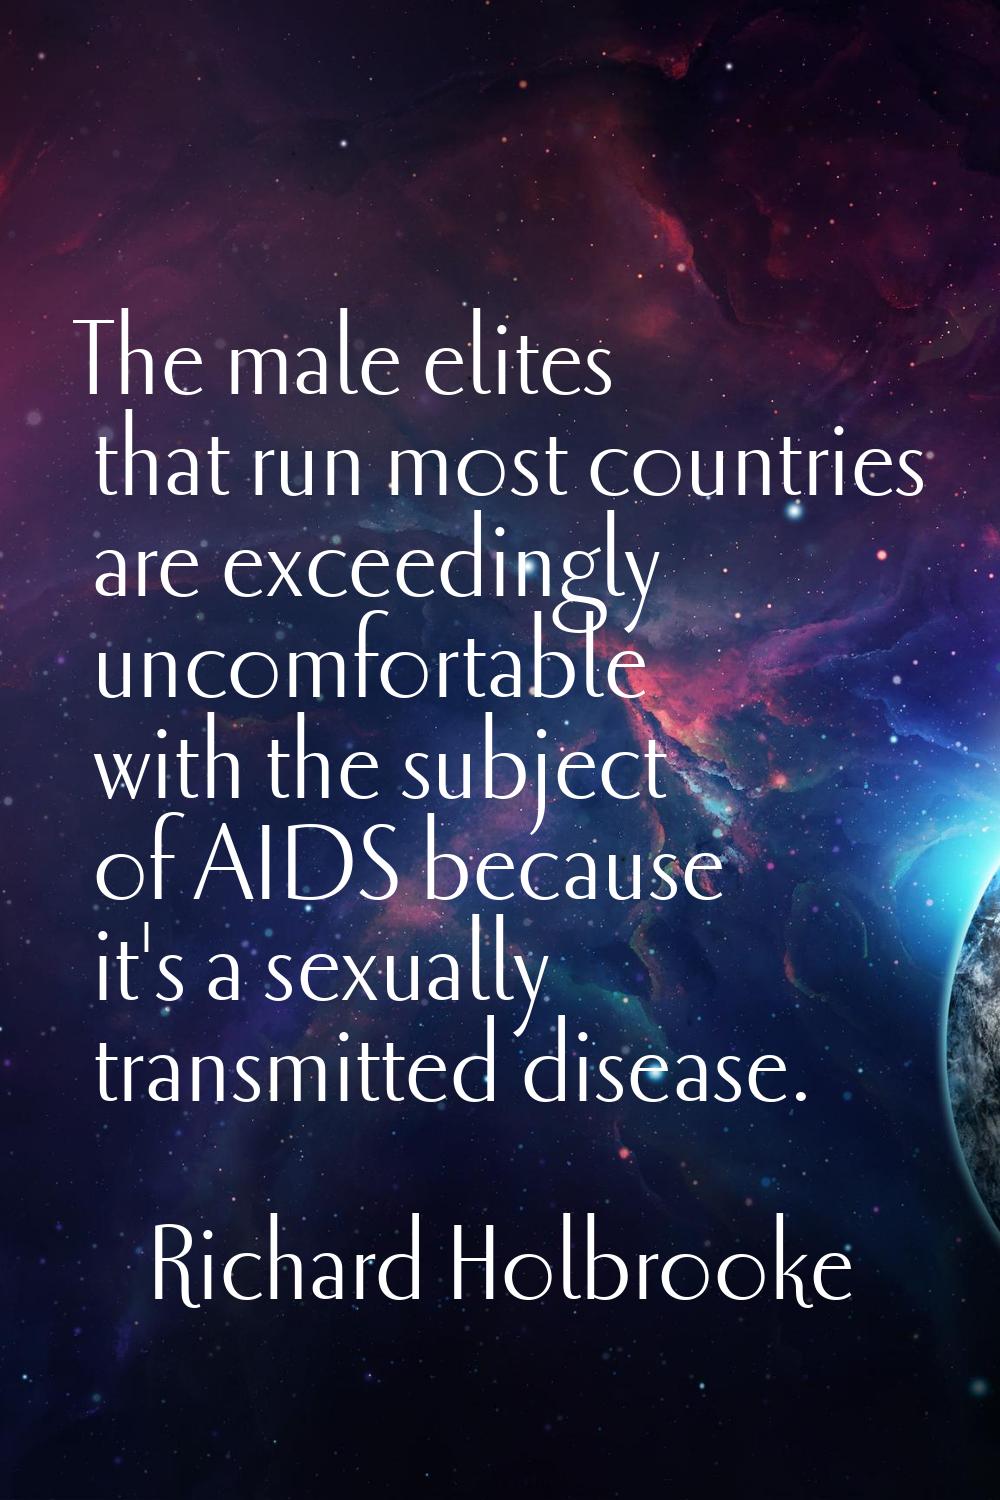 The male elites that run most countries are exceedingly uncomfortable with the subject of AIDS beca